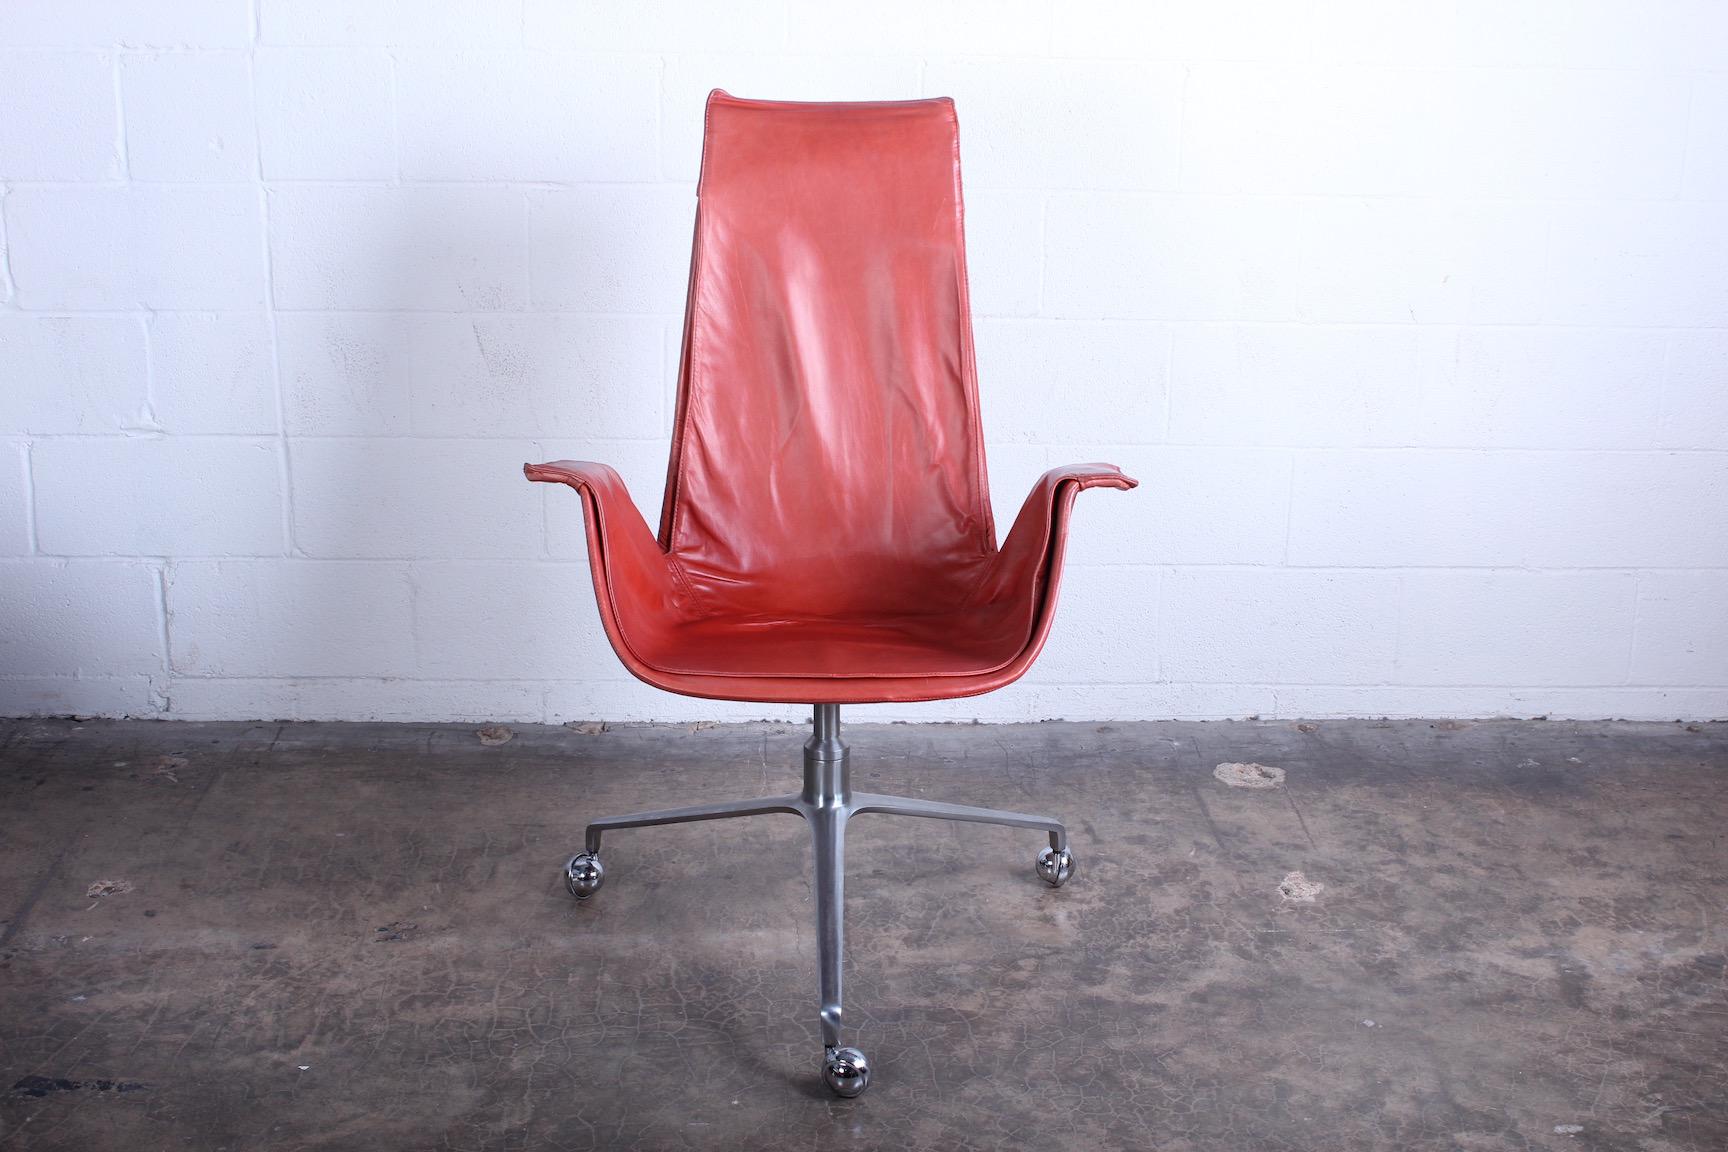 High back (executive) version of the Model FK 6725, leather 'Bird' chair designed by Preben Fabricius and Jørgen Kastholm, manufactured in Germany by Alfred Kill International.